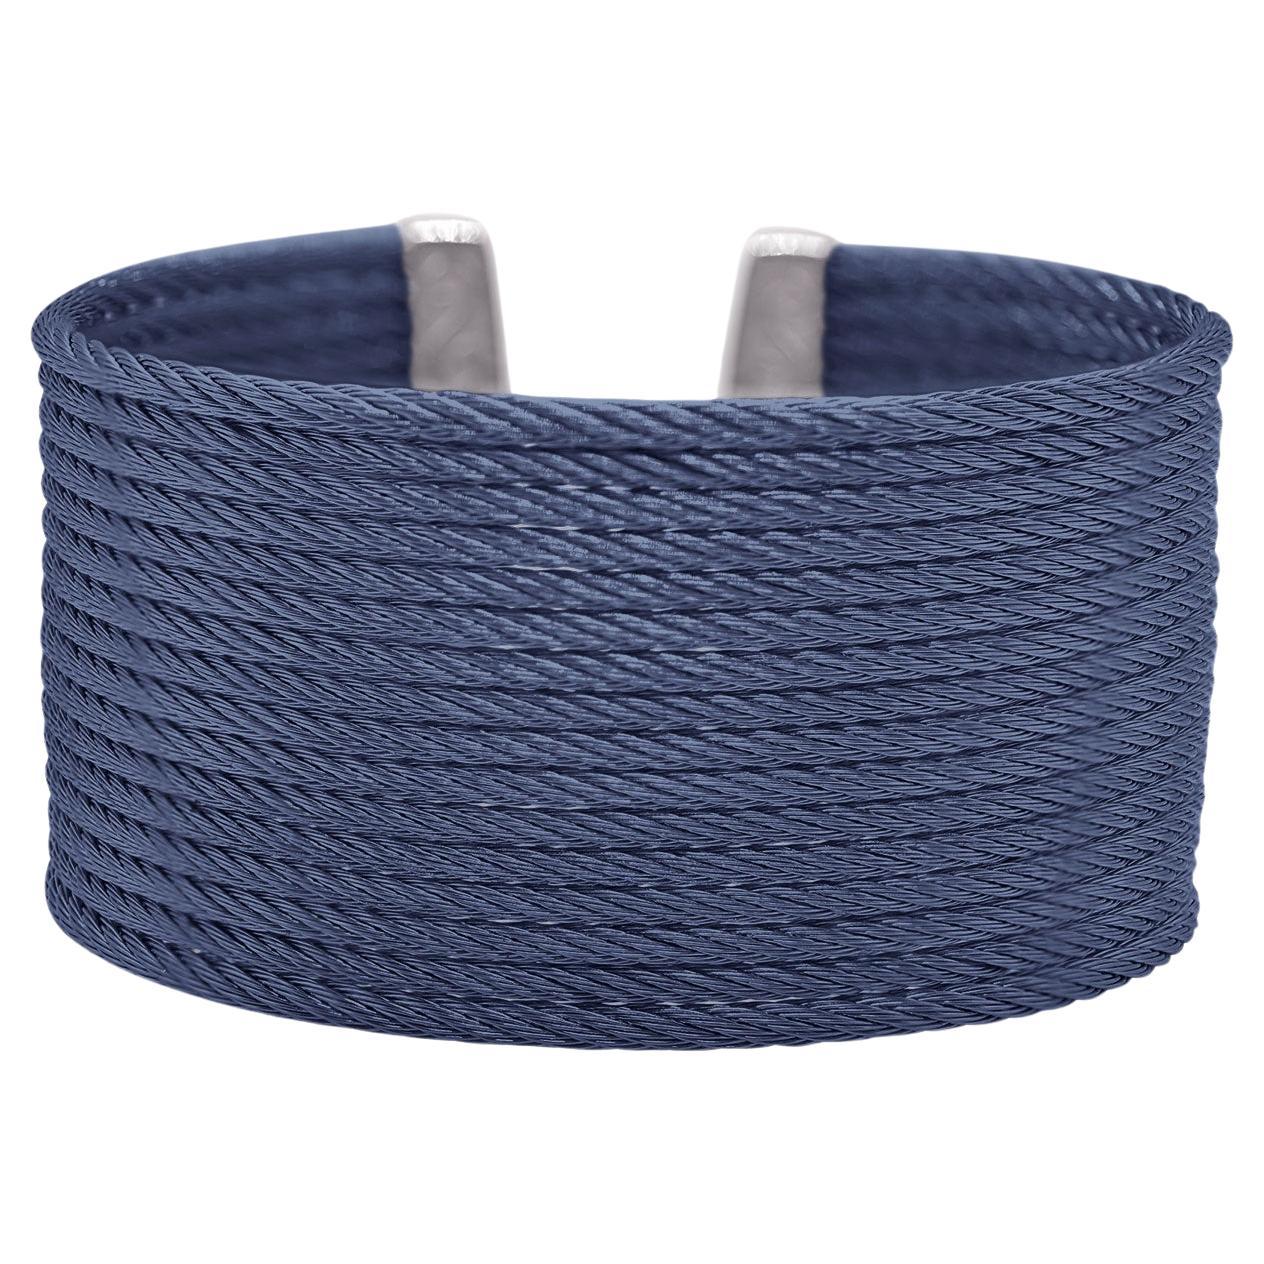 Alor Blueberry Cable Cuff Essentials 16-Row Cuff  For Sale